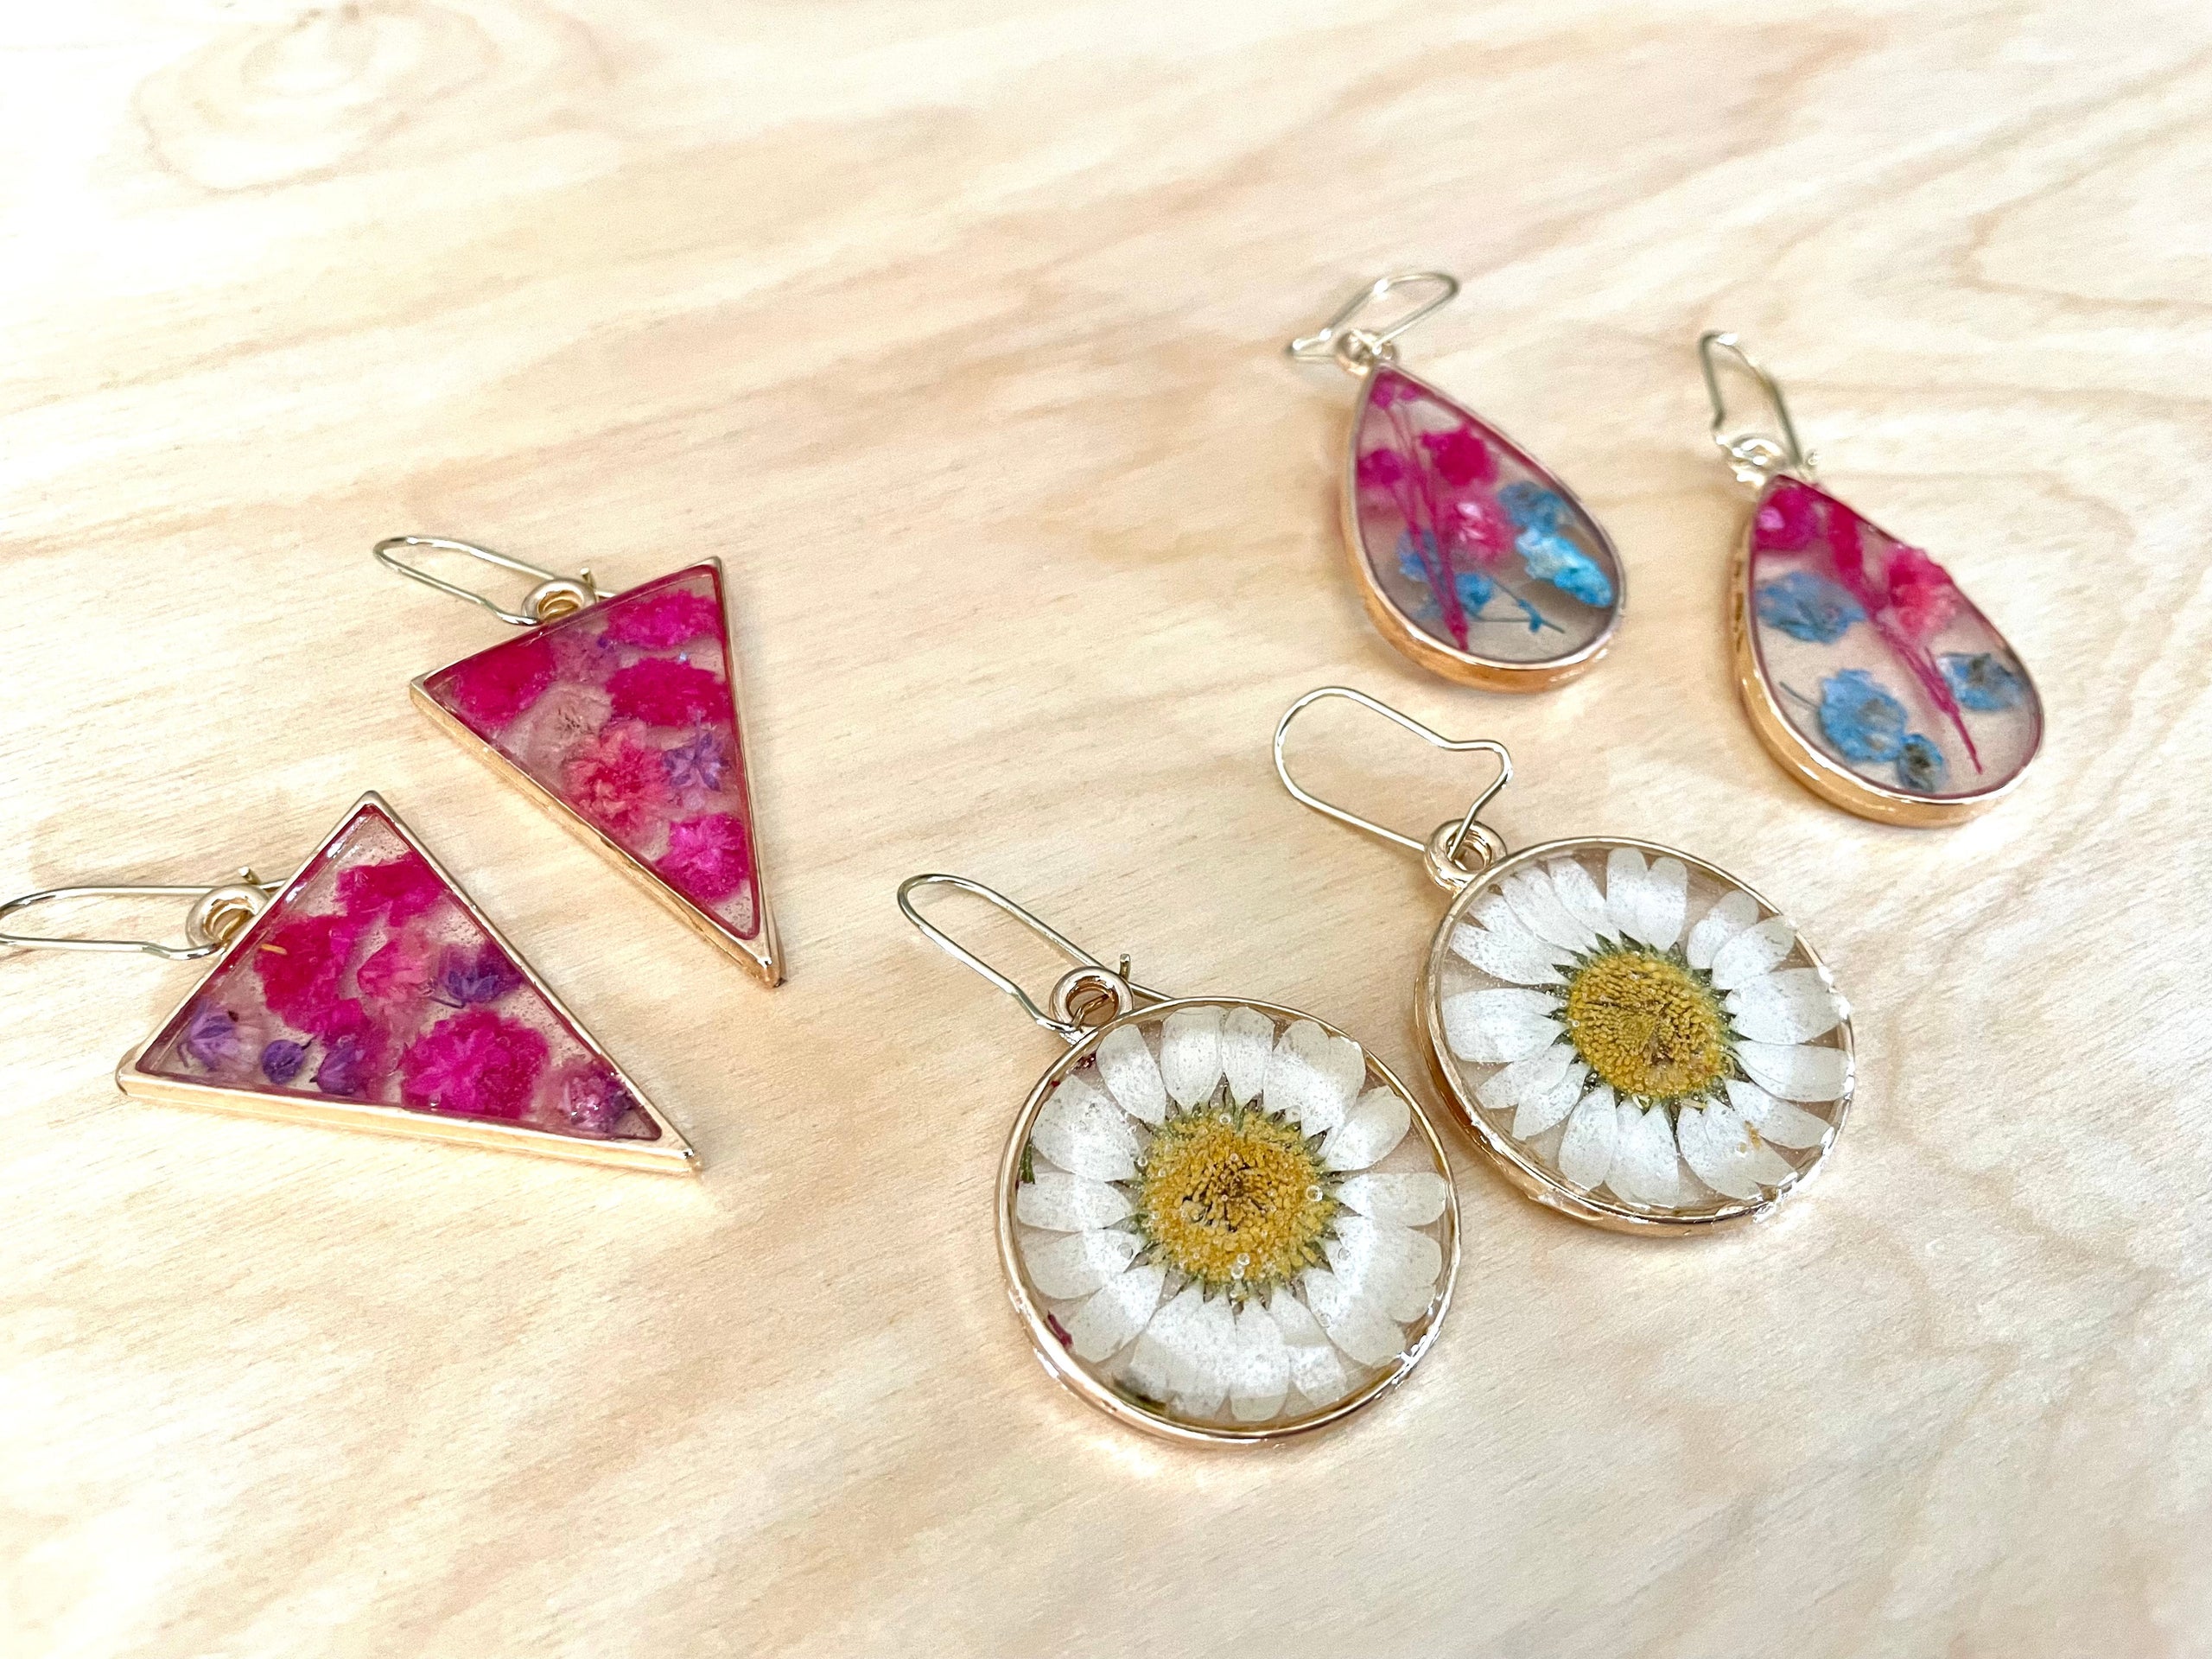 Epoxy Resin Jewelry Gifts - Our Virginia Home